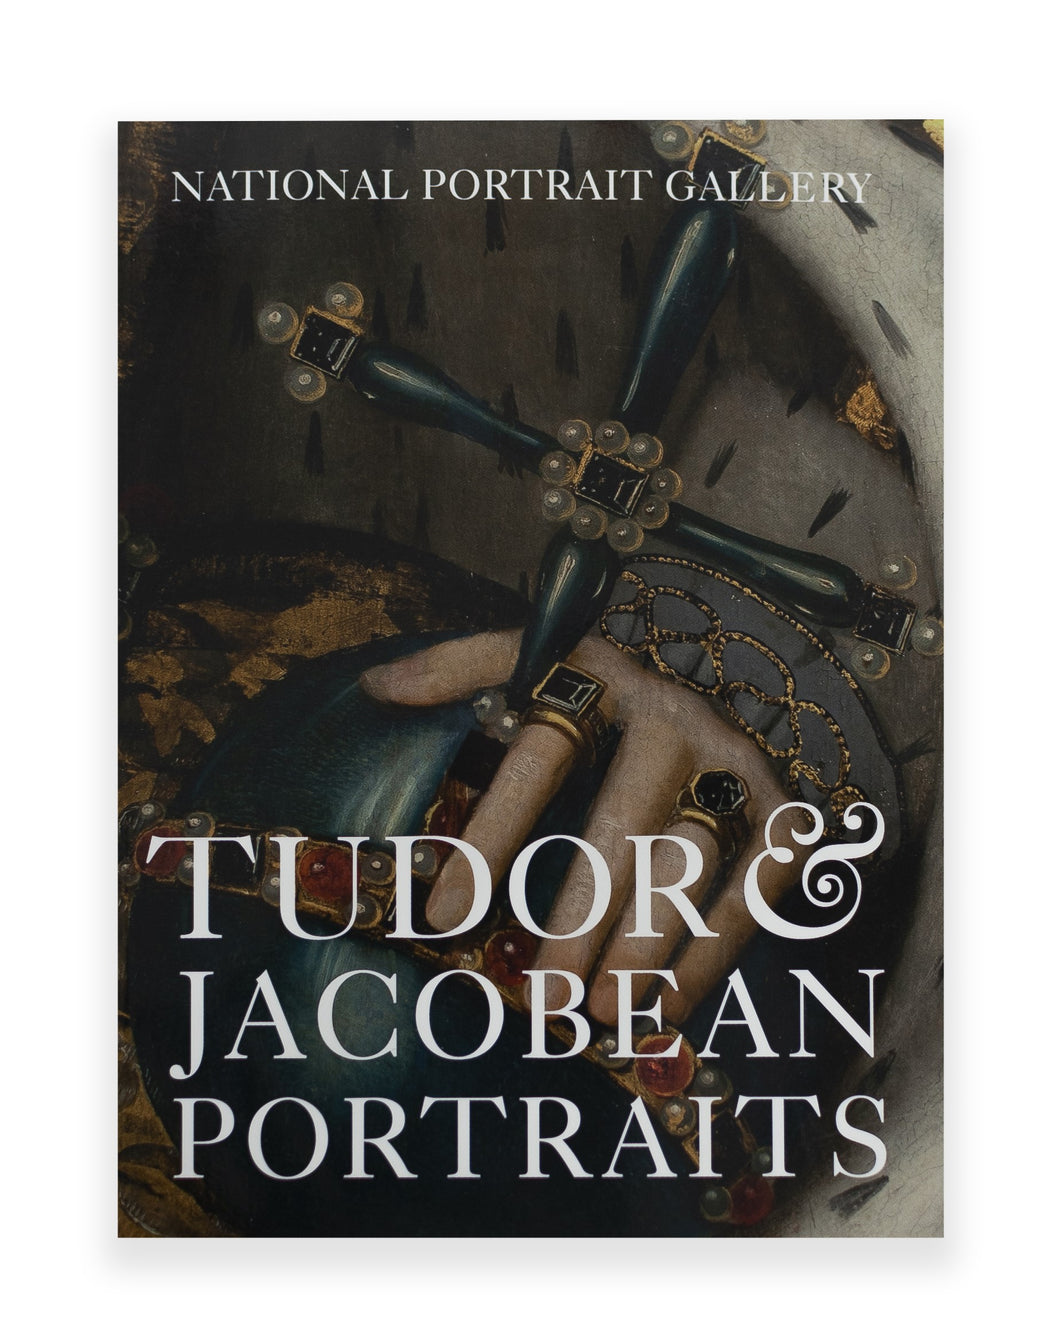 Charlotte Bolland - Tudor and Jacobean Portraits. Front Cover. Book for sale from the Harley Gallery online shop